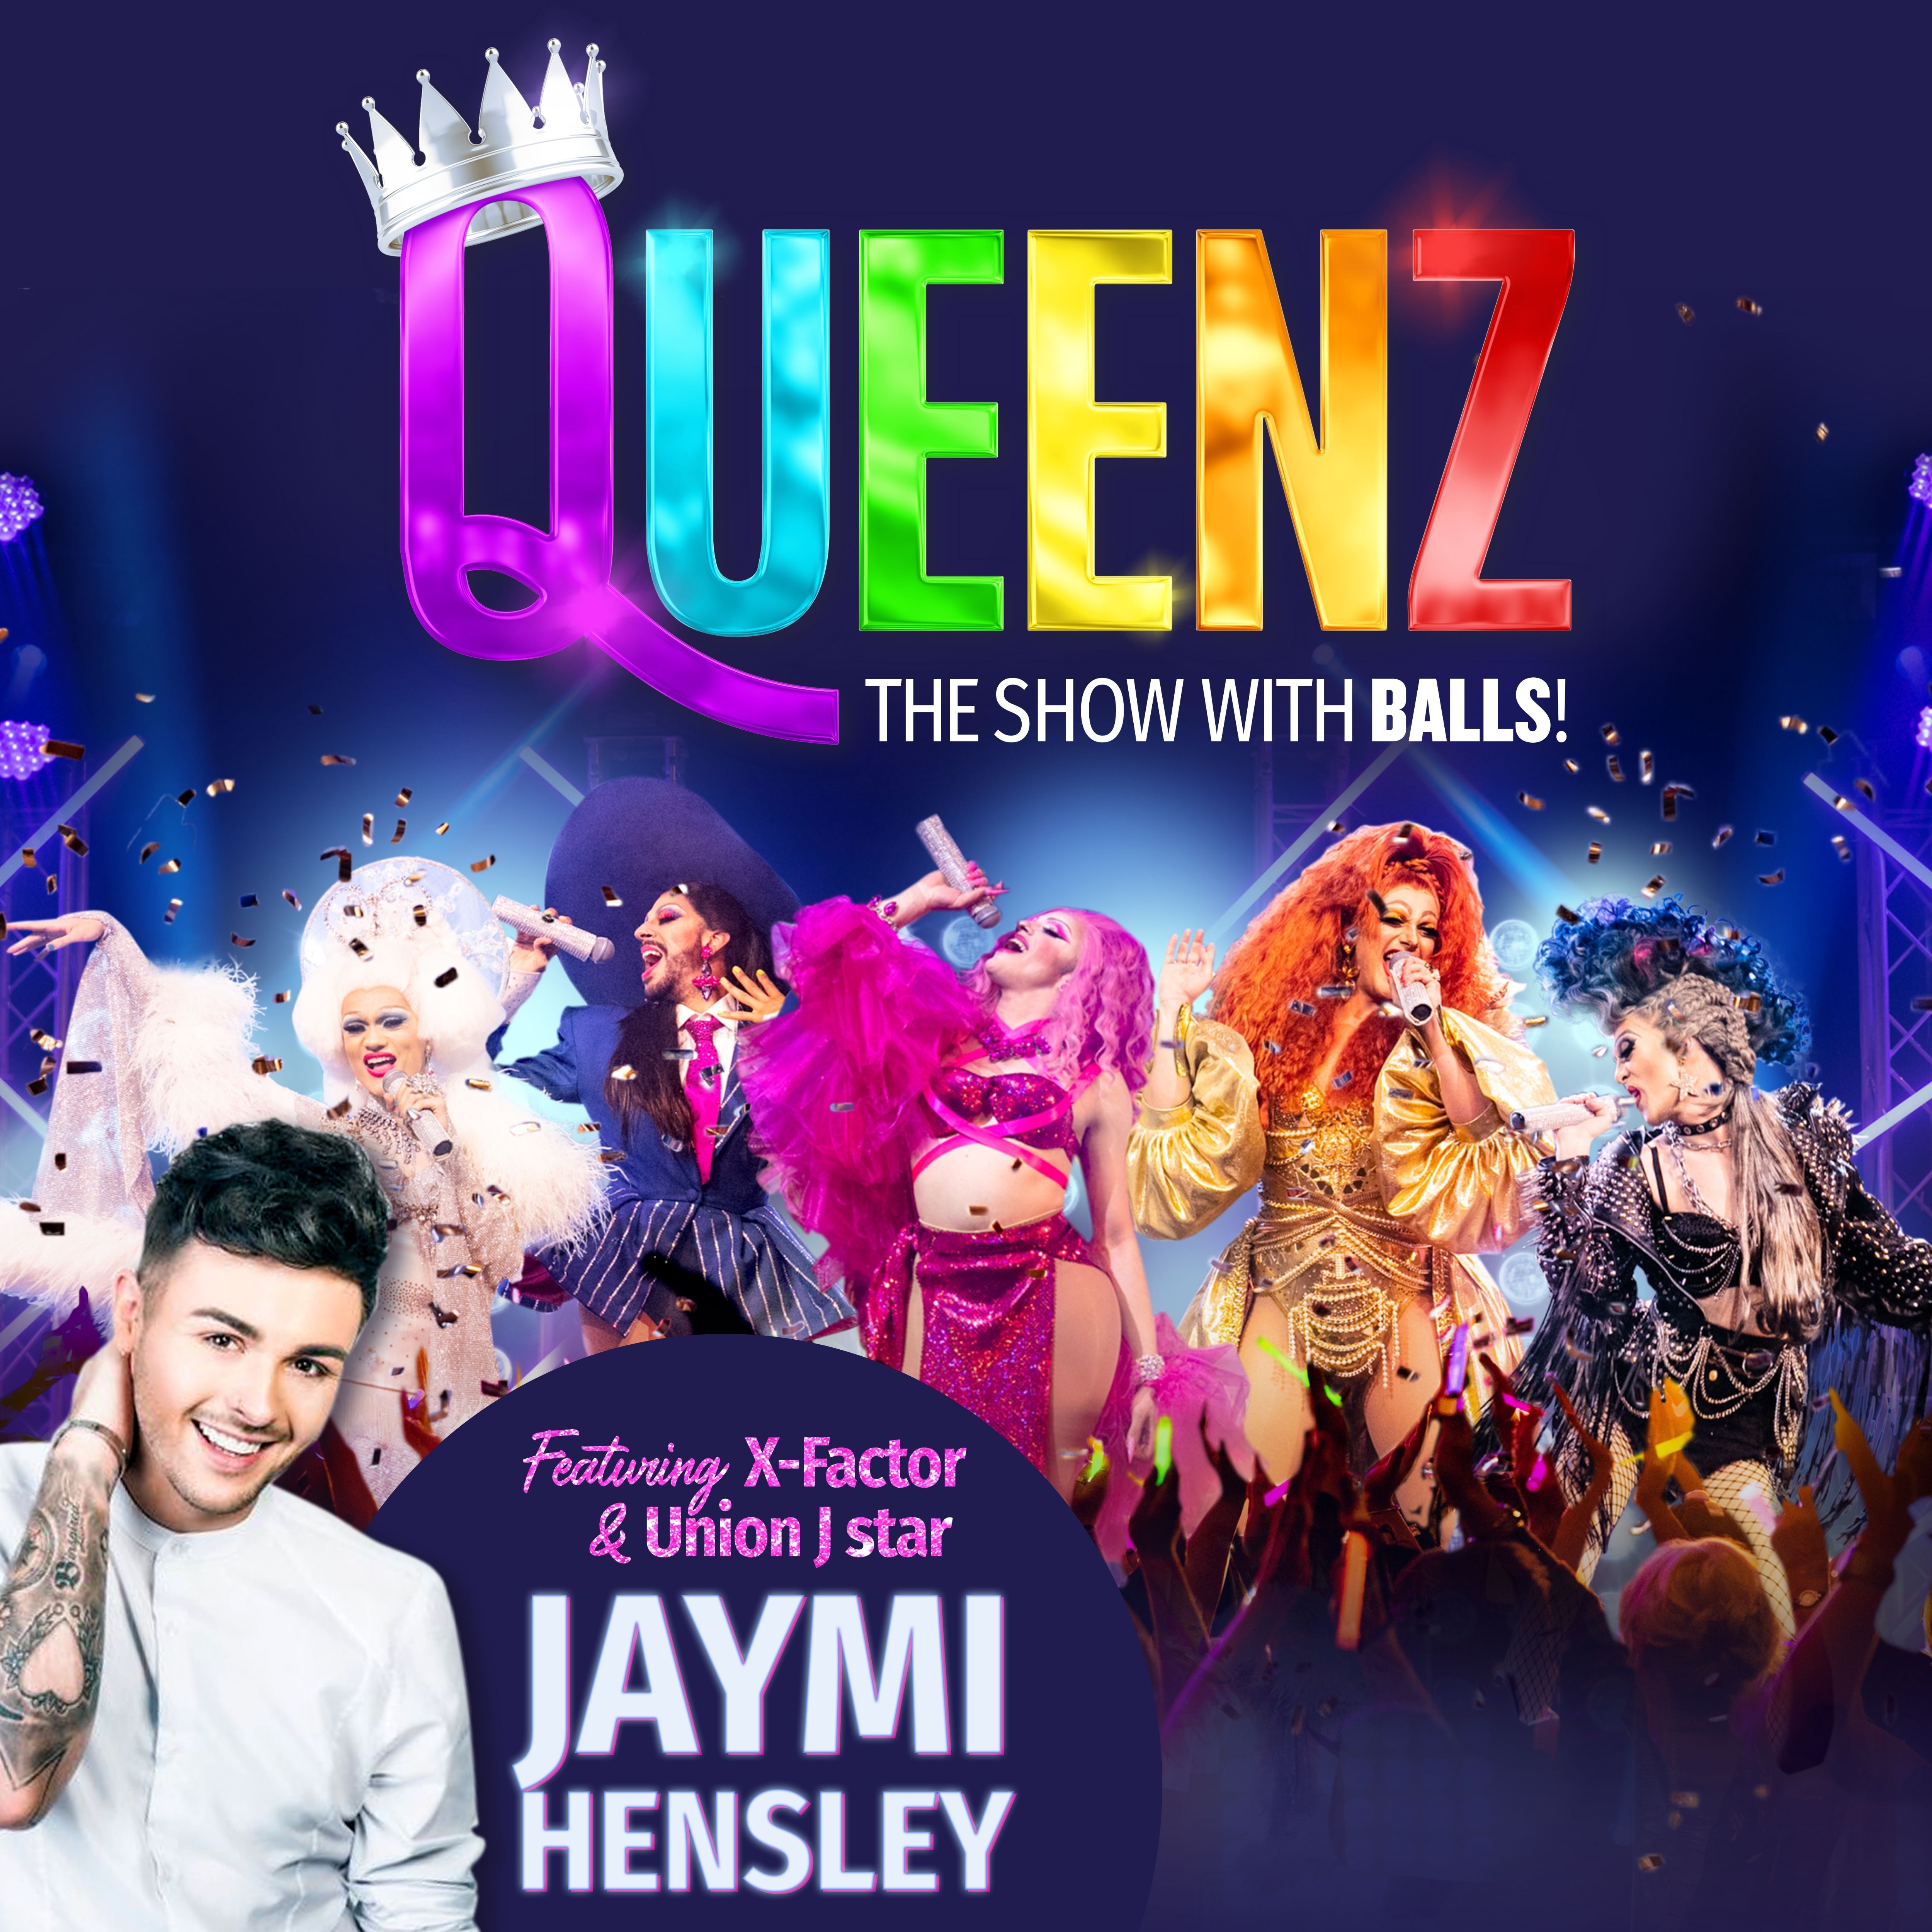 Queens - The Show With Balls! on 26 November 2022